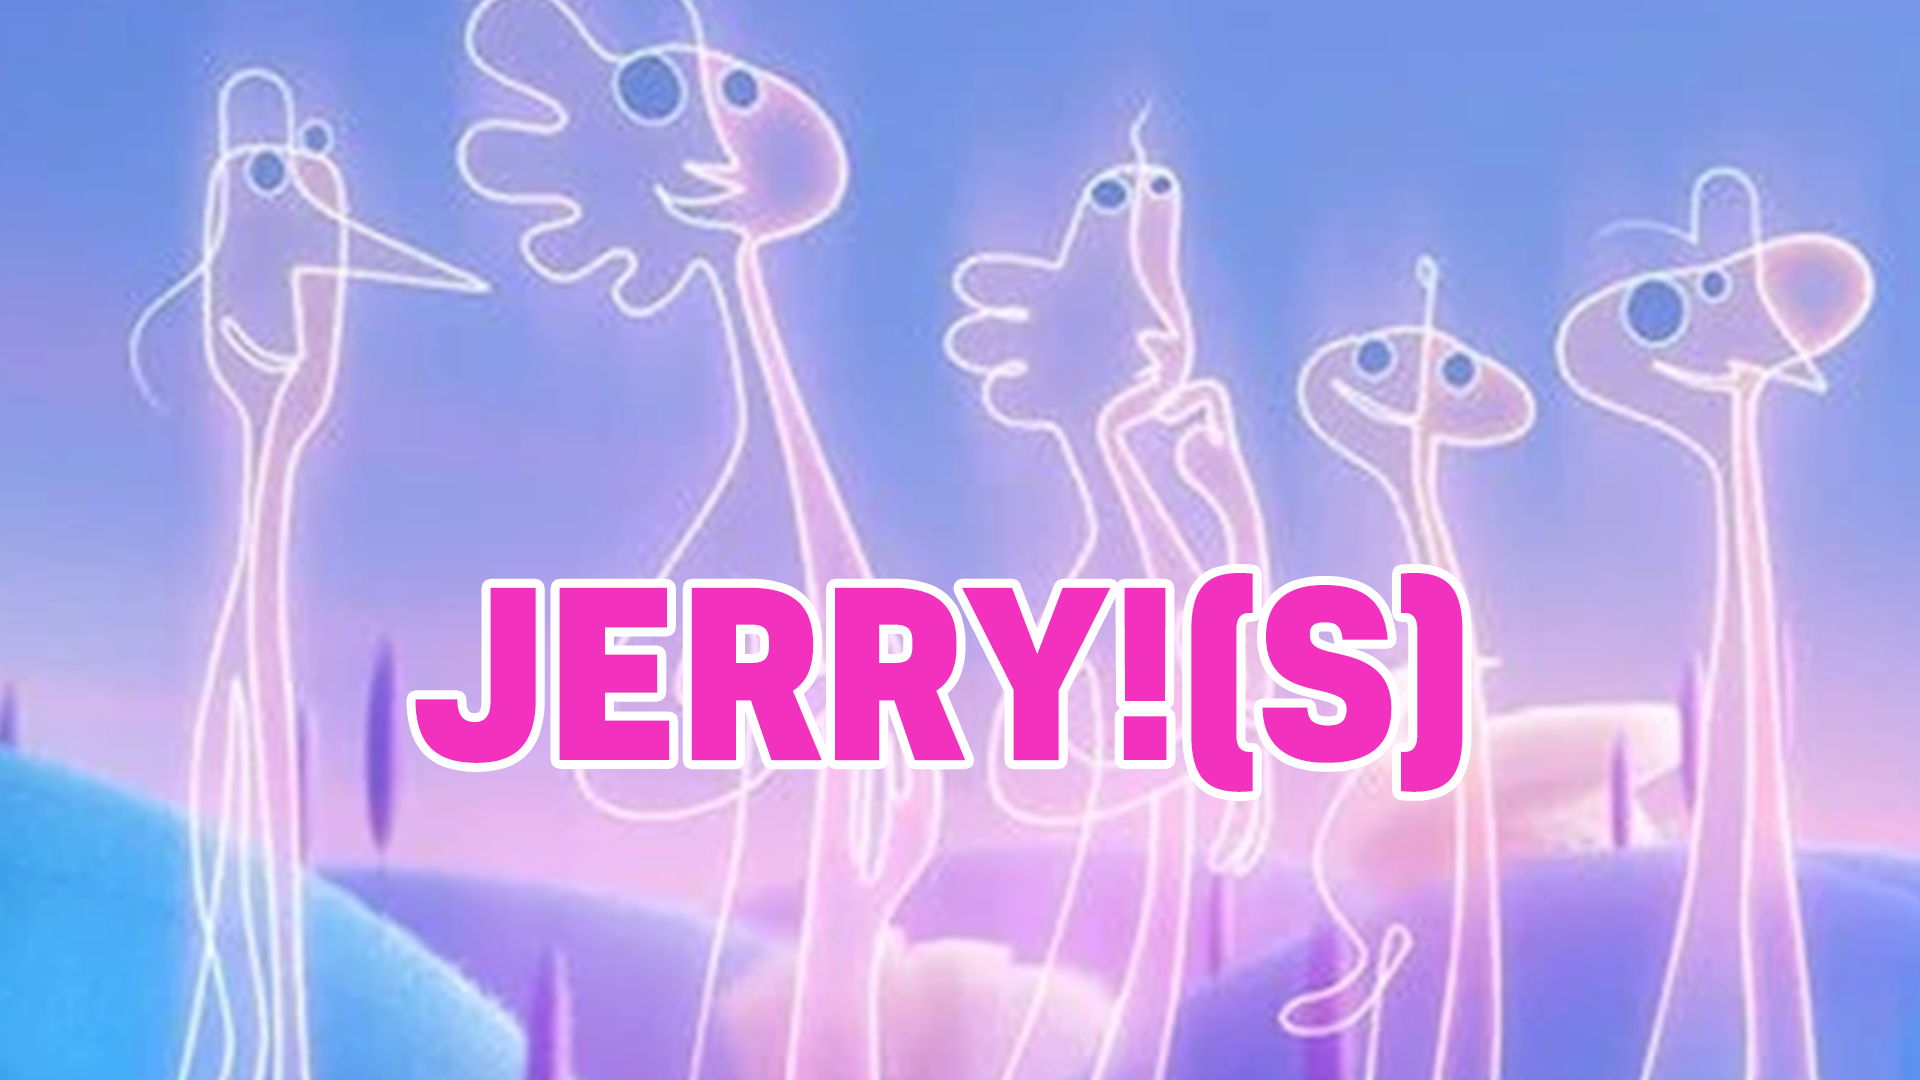 Jerry result